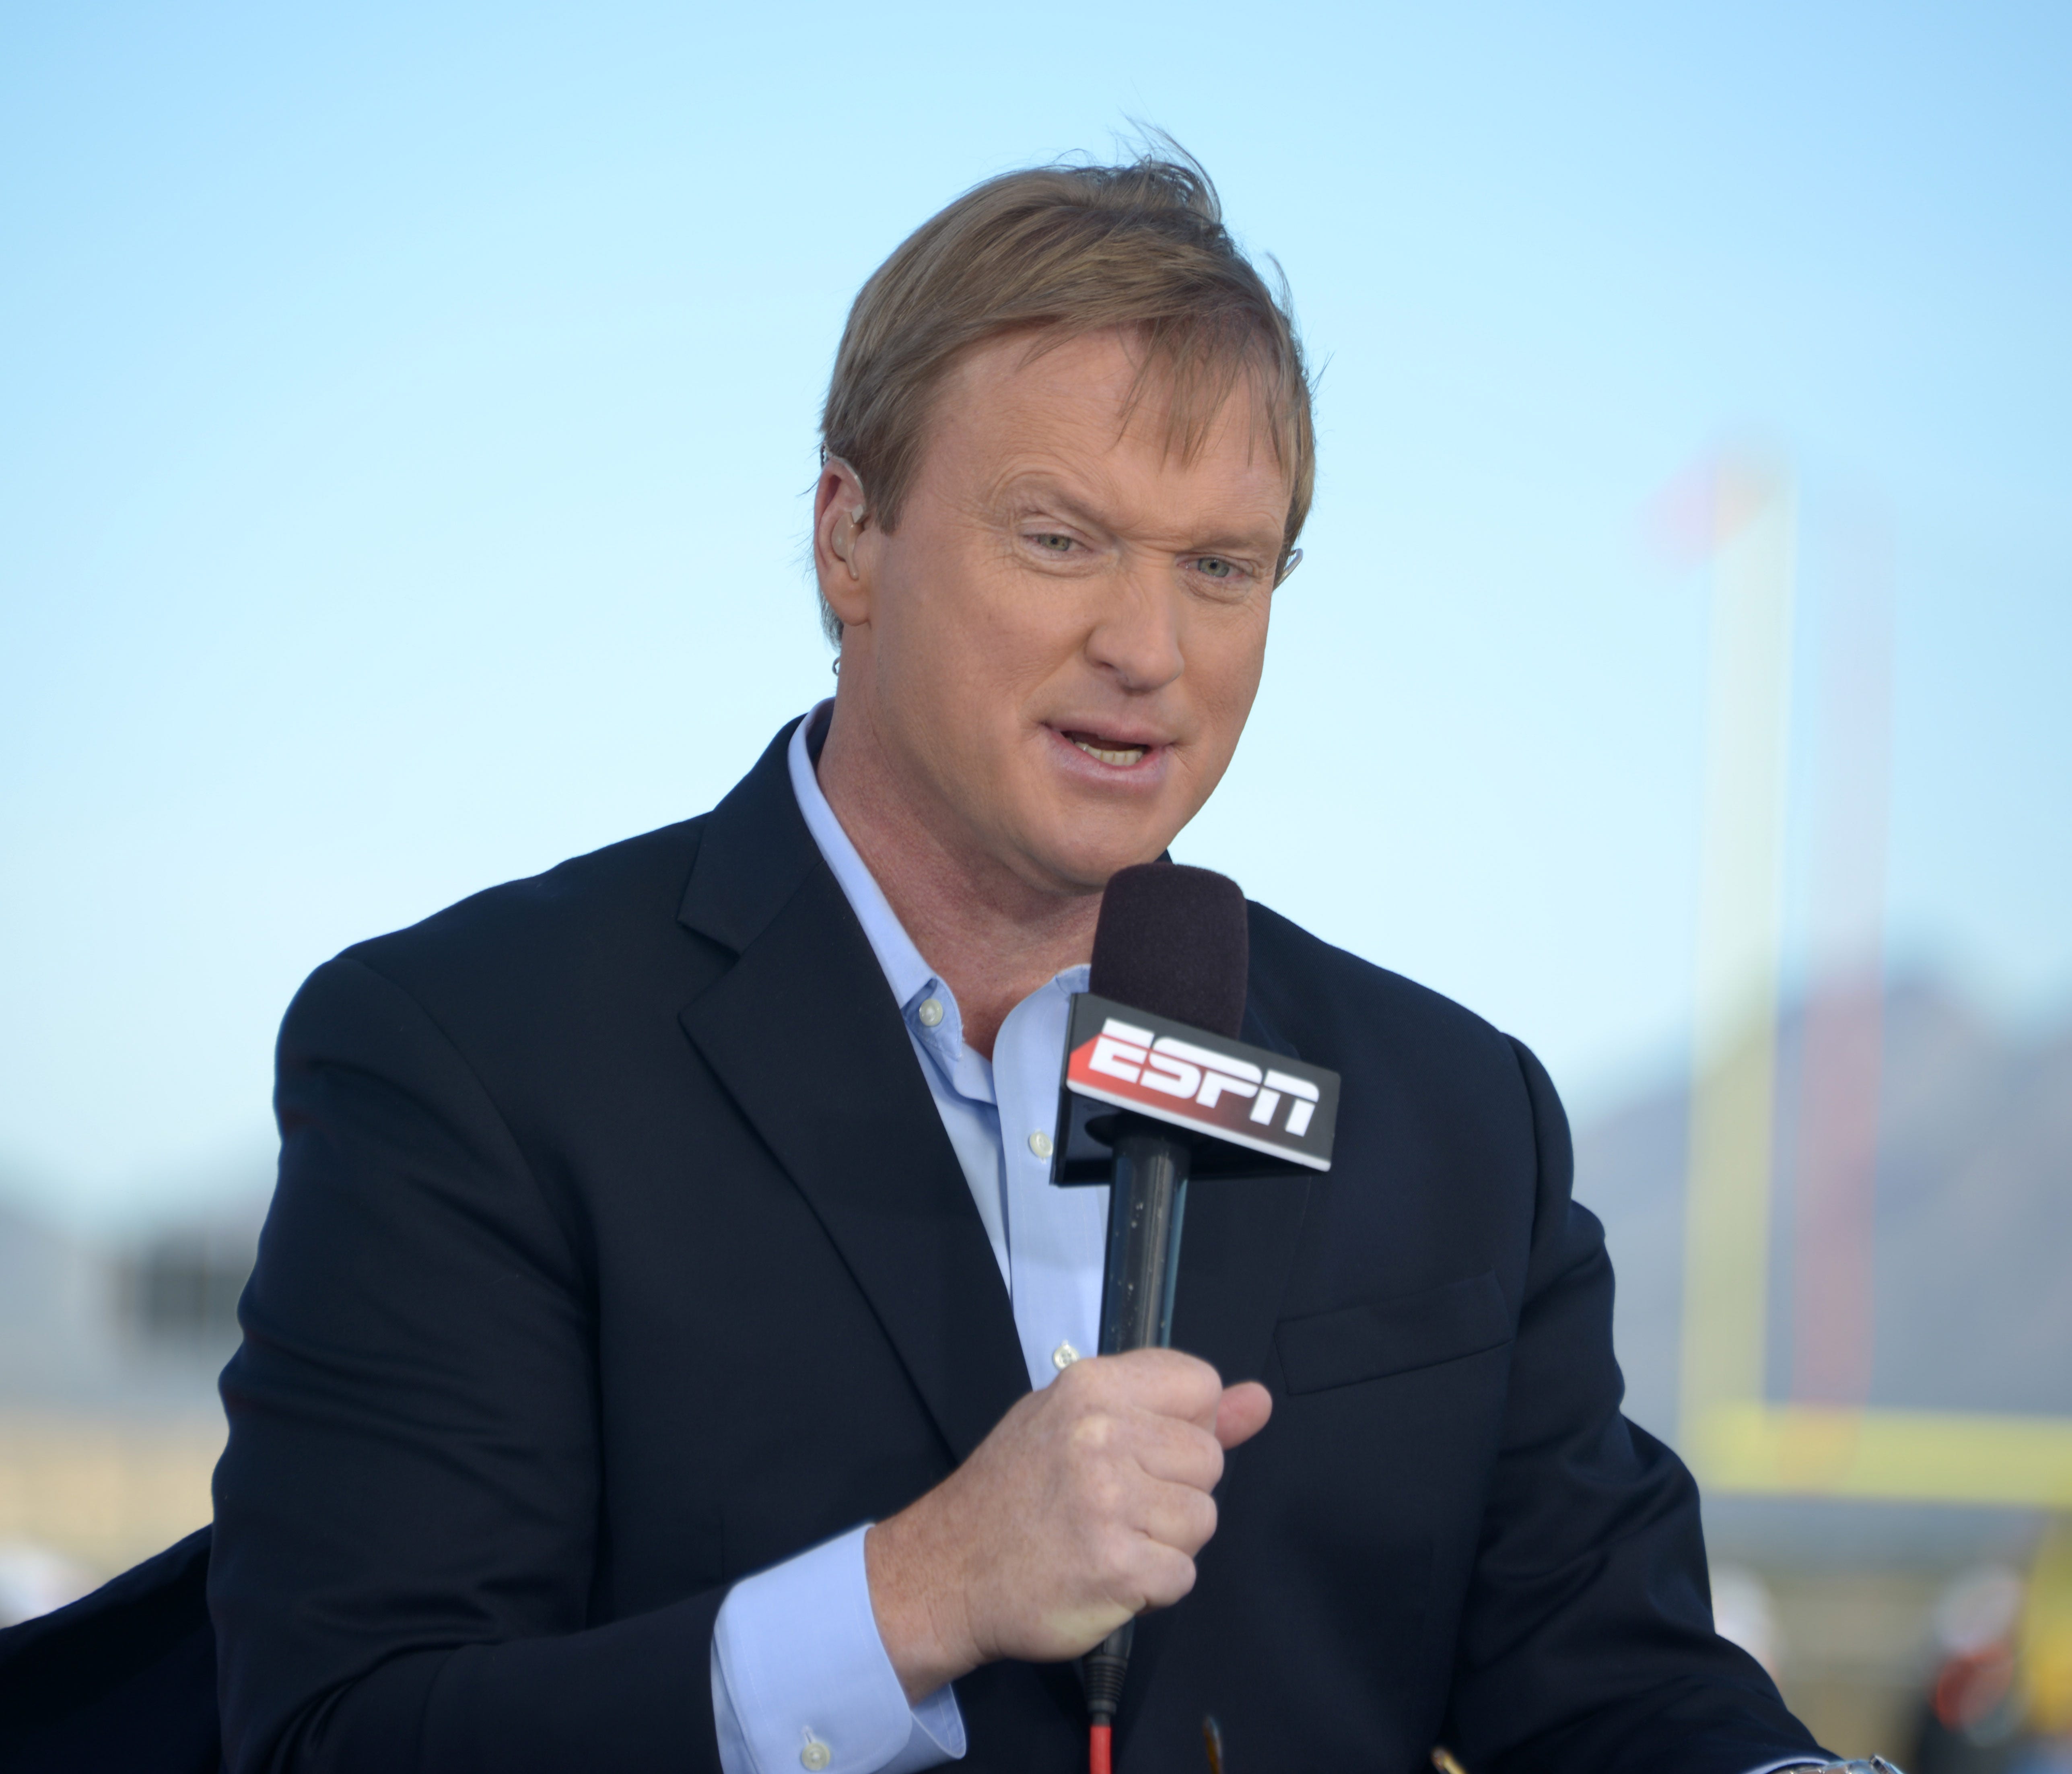 Jan 23, 2015; Scottsdale, AZ, USA; ESPN broadcaster and Tampa Bay Buccaneers and Oakland Raiders former coach Jon Gruden at Team Irvin practice at Scottsdale Community College in advance of the 2015 Pro Bowl. Mandatory Credit: Kirby Lee-USA TODAY Spo